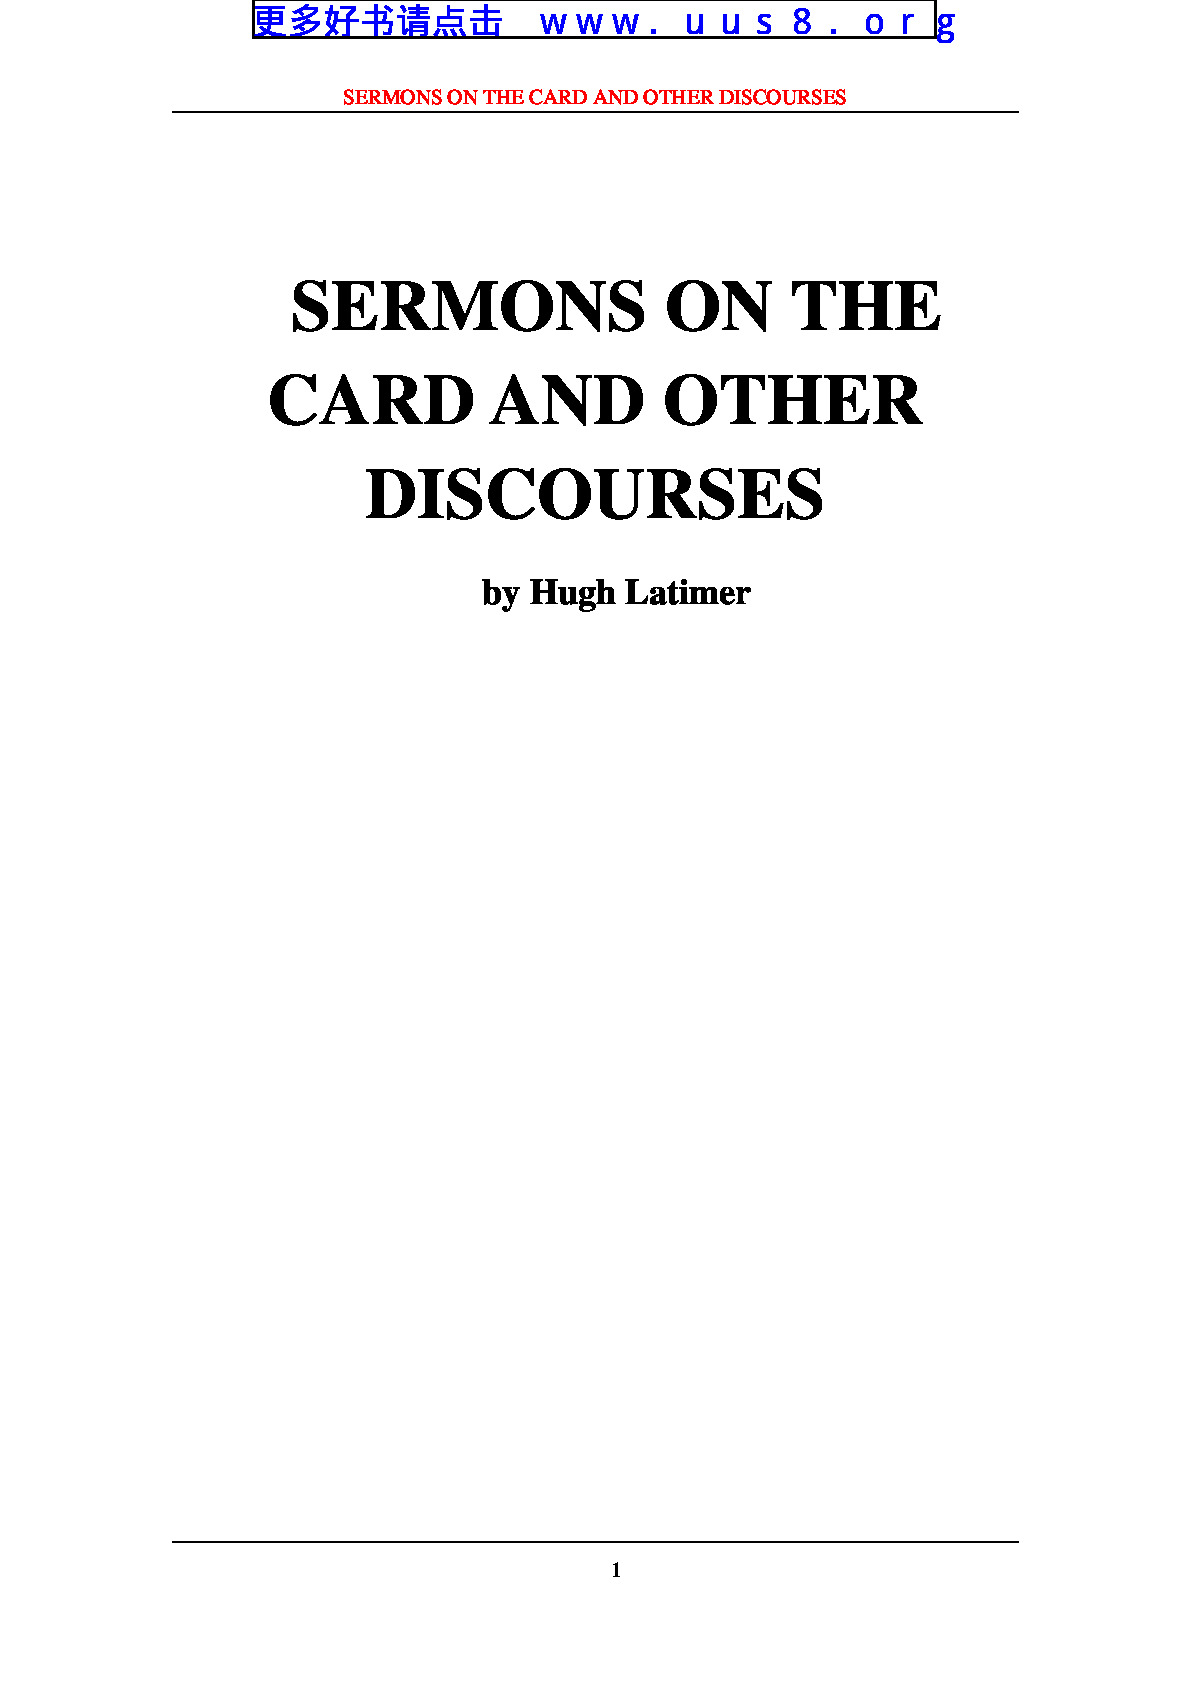 SERMONS_ON_THE_CARD_AND_OTHER_DISCOURSES(卡上)